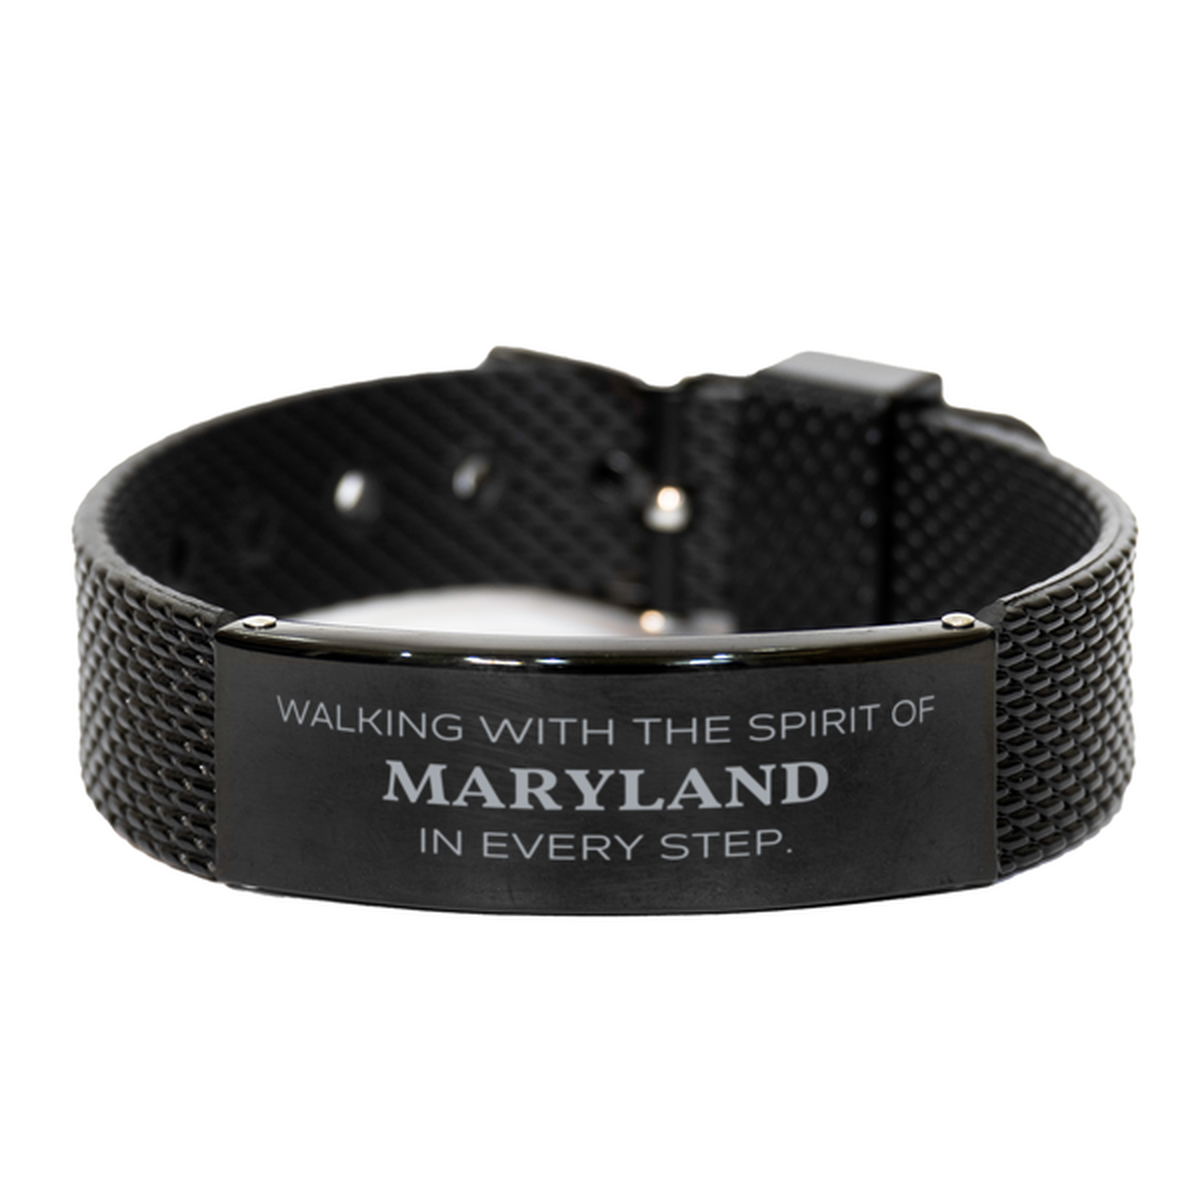 Maryland Gifts, Walking with the spirit, Love Maryland Birthday Christmas Black Shark Mesh Bracelet For Maryland People, Men, Women, Friends